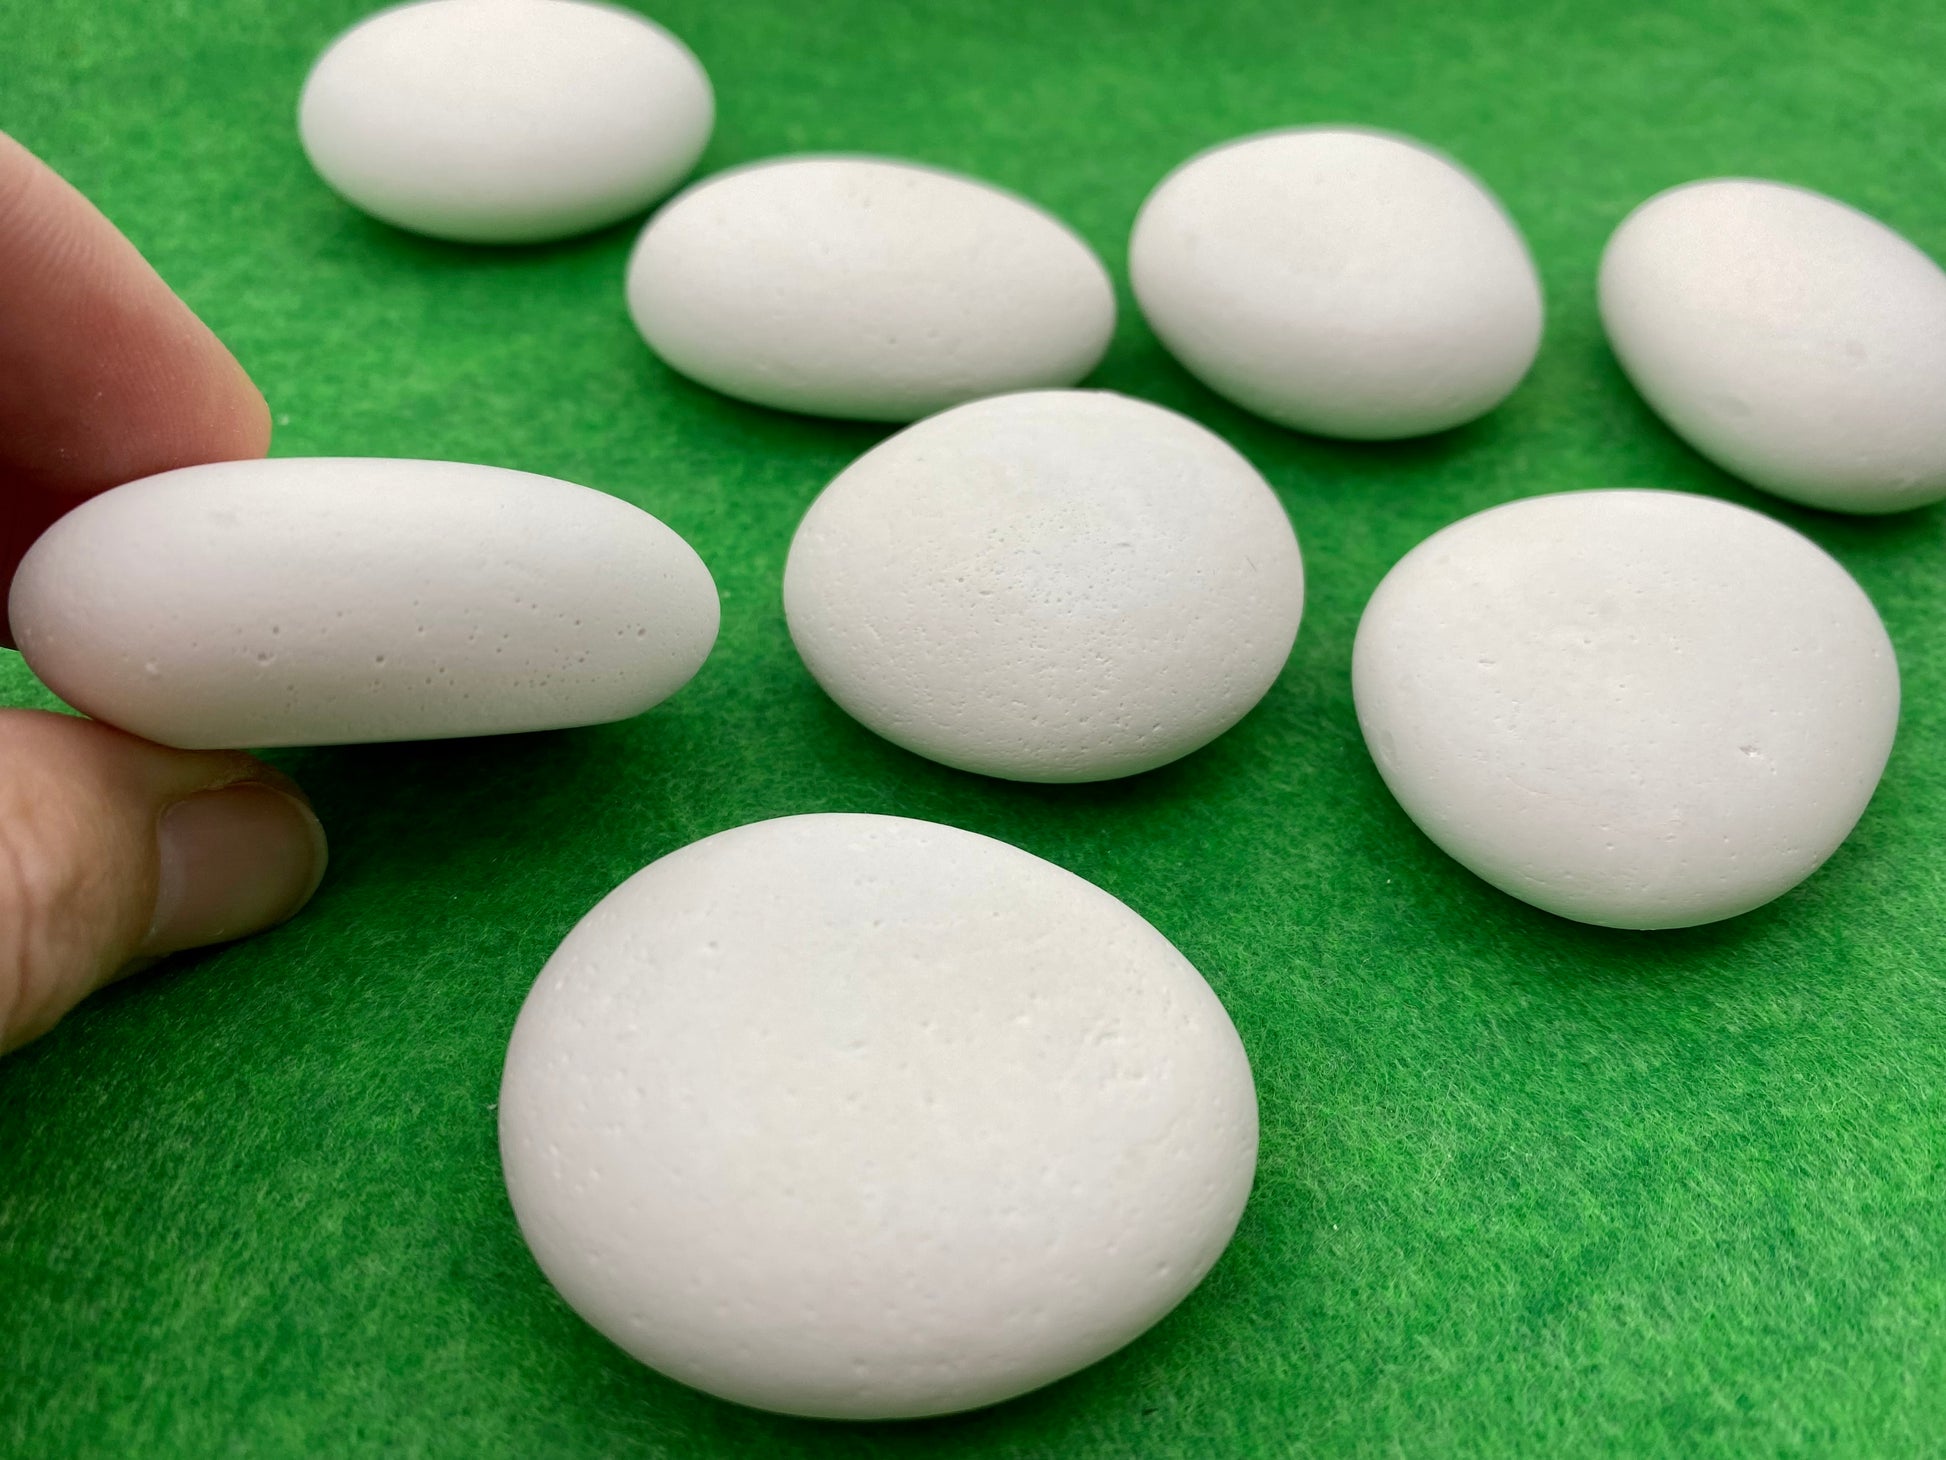 8 small white plaster pebbles of different shapes and sizes, one being held by a hand showing the side of it